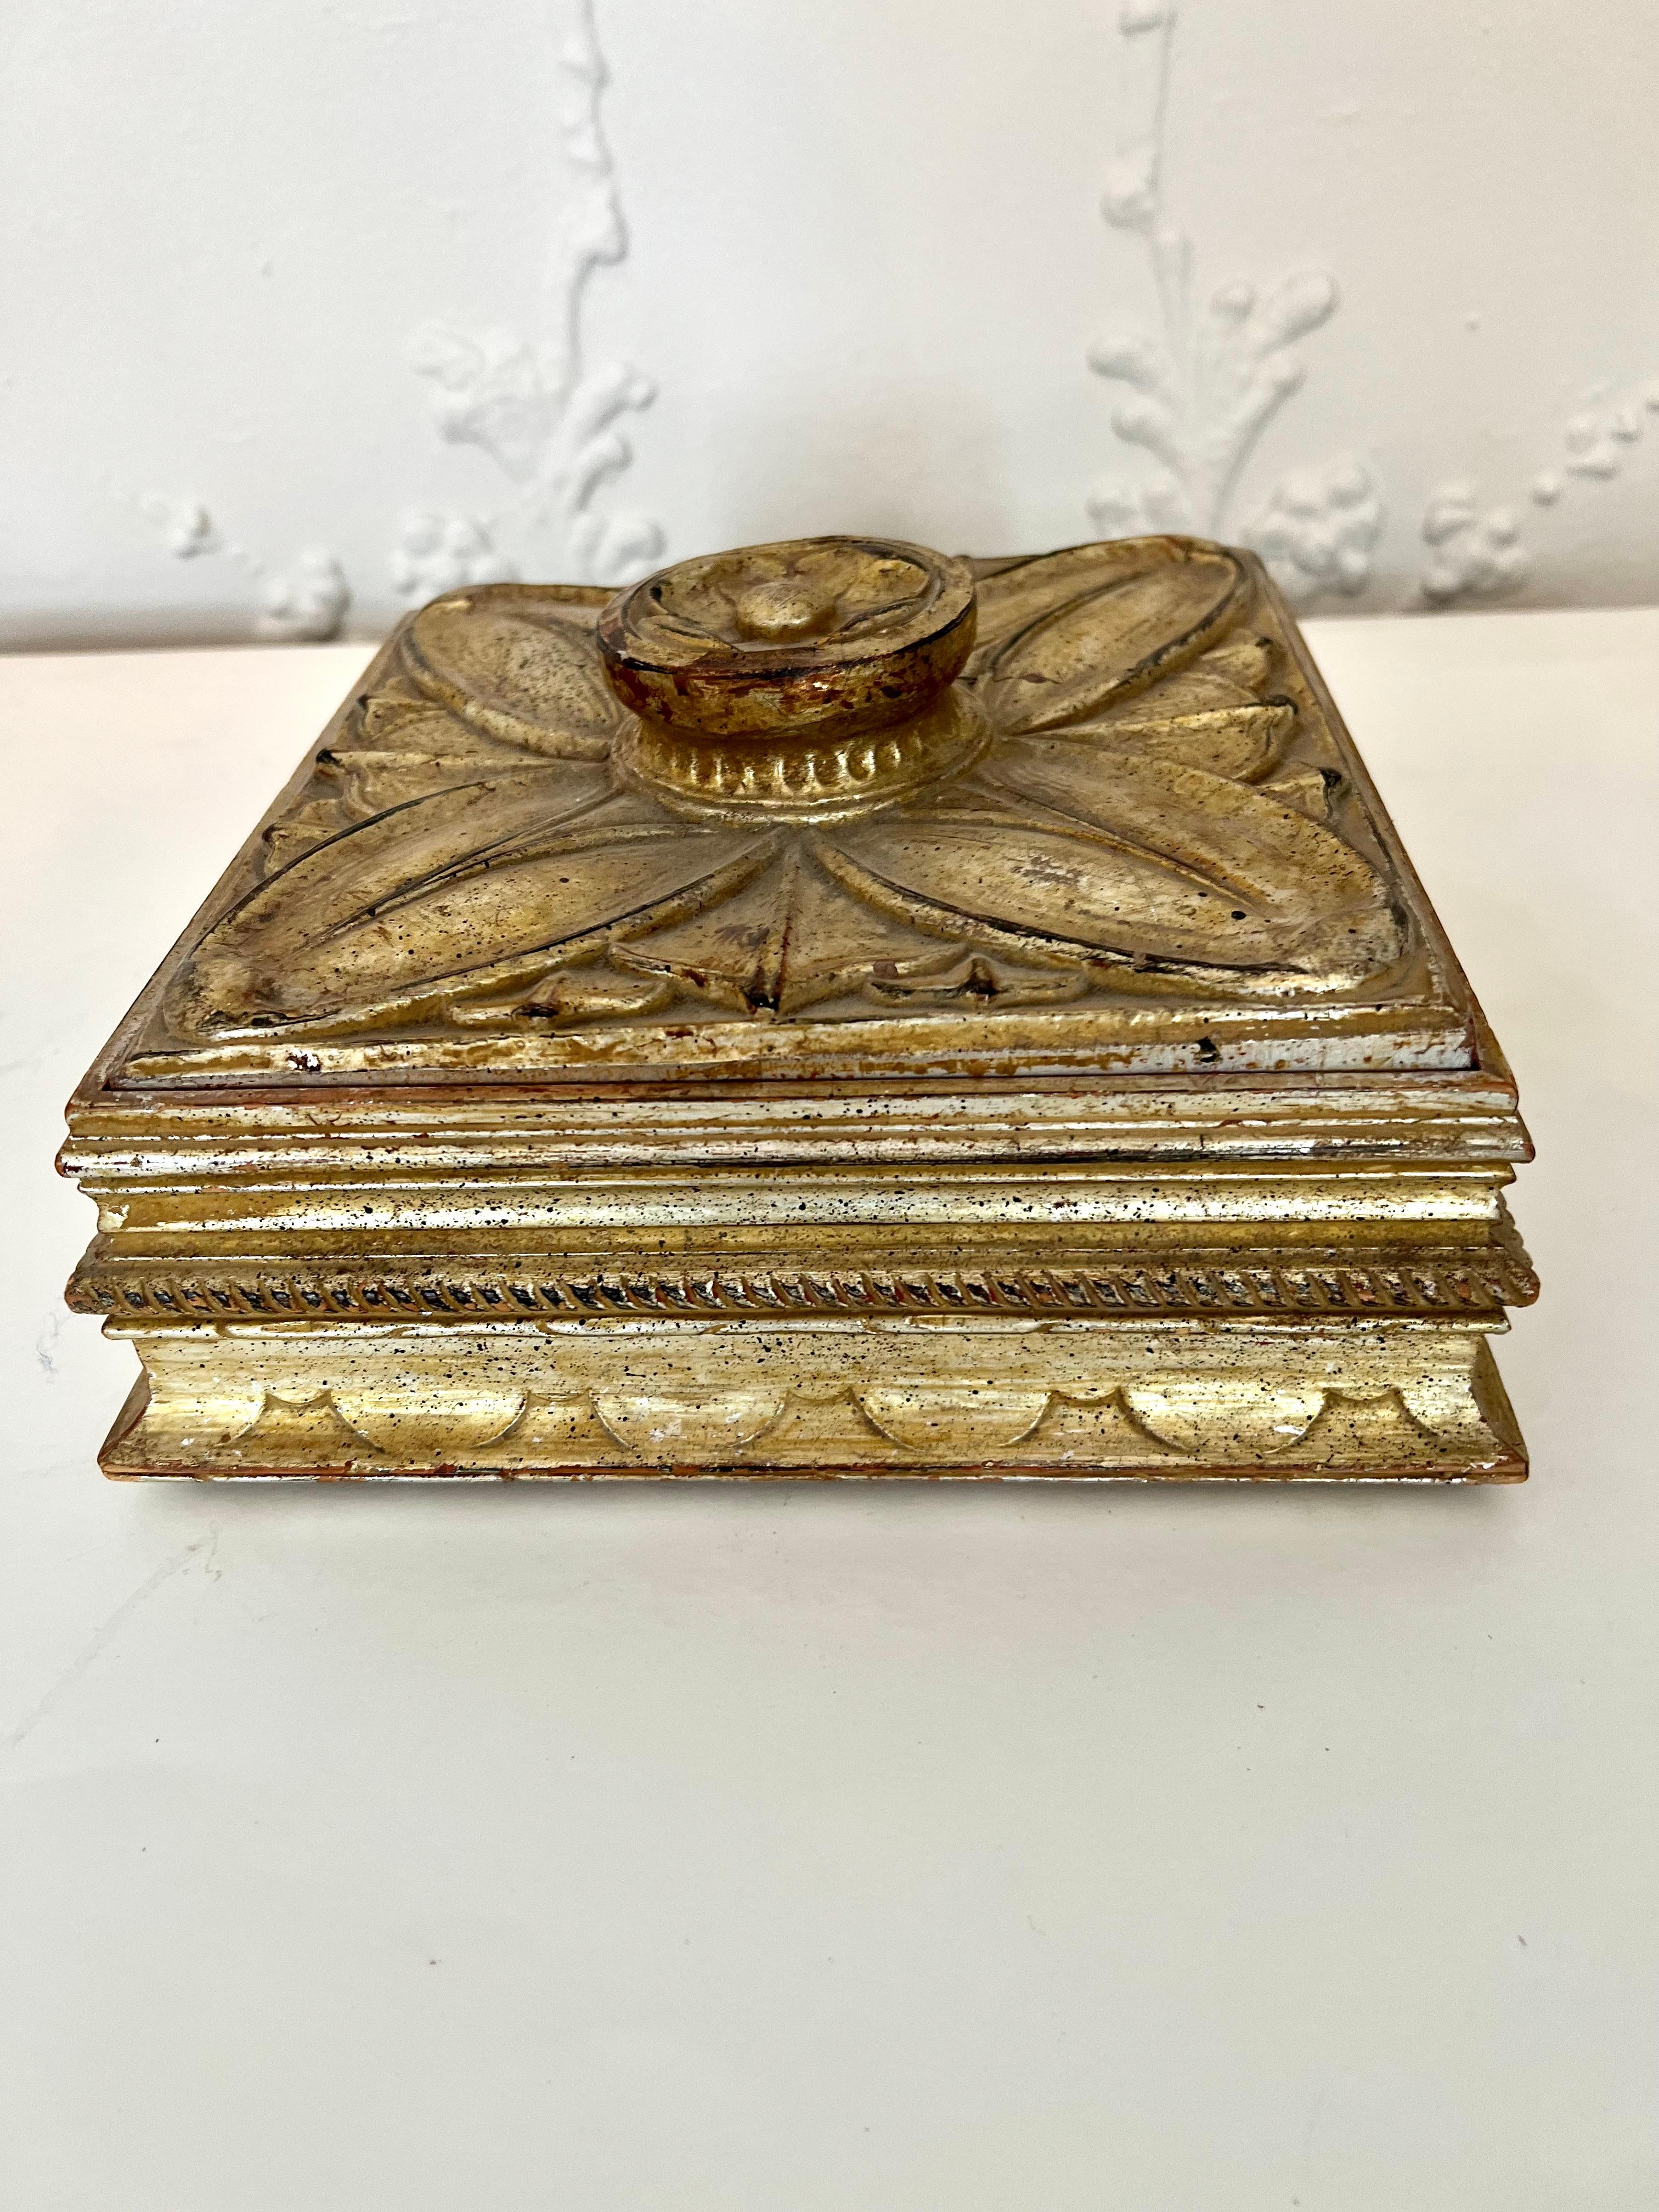 A wonderful Italian Box with a Wooden Base and terracotta floral lid.  The piece is not only decorative, but a compliment to any desk, office or work station.

Also, a nice decorative piece for any cocktail, side or console table.  We have shown